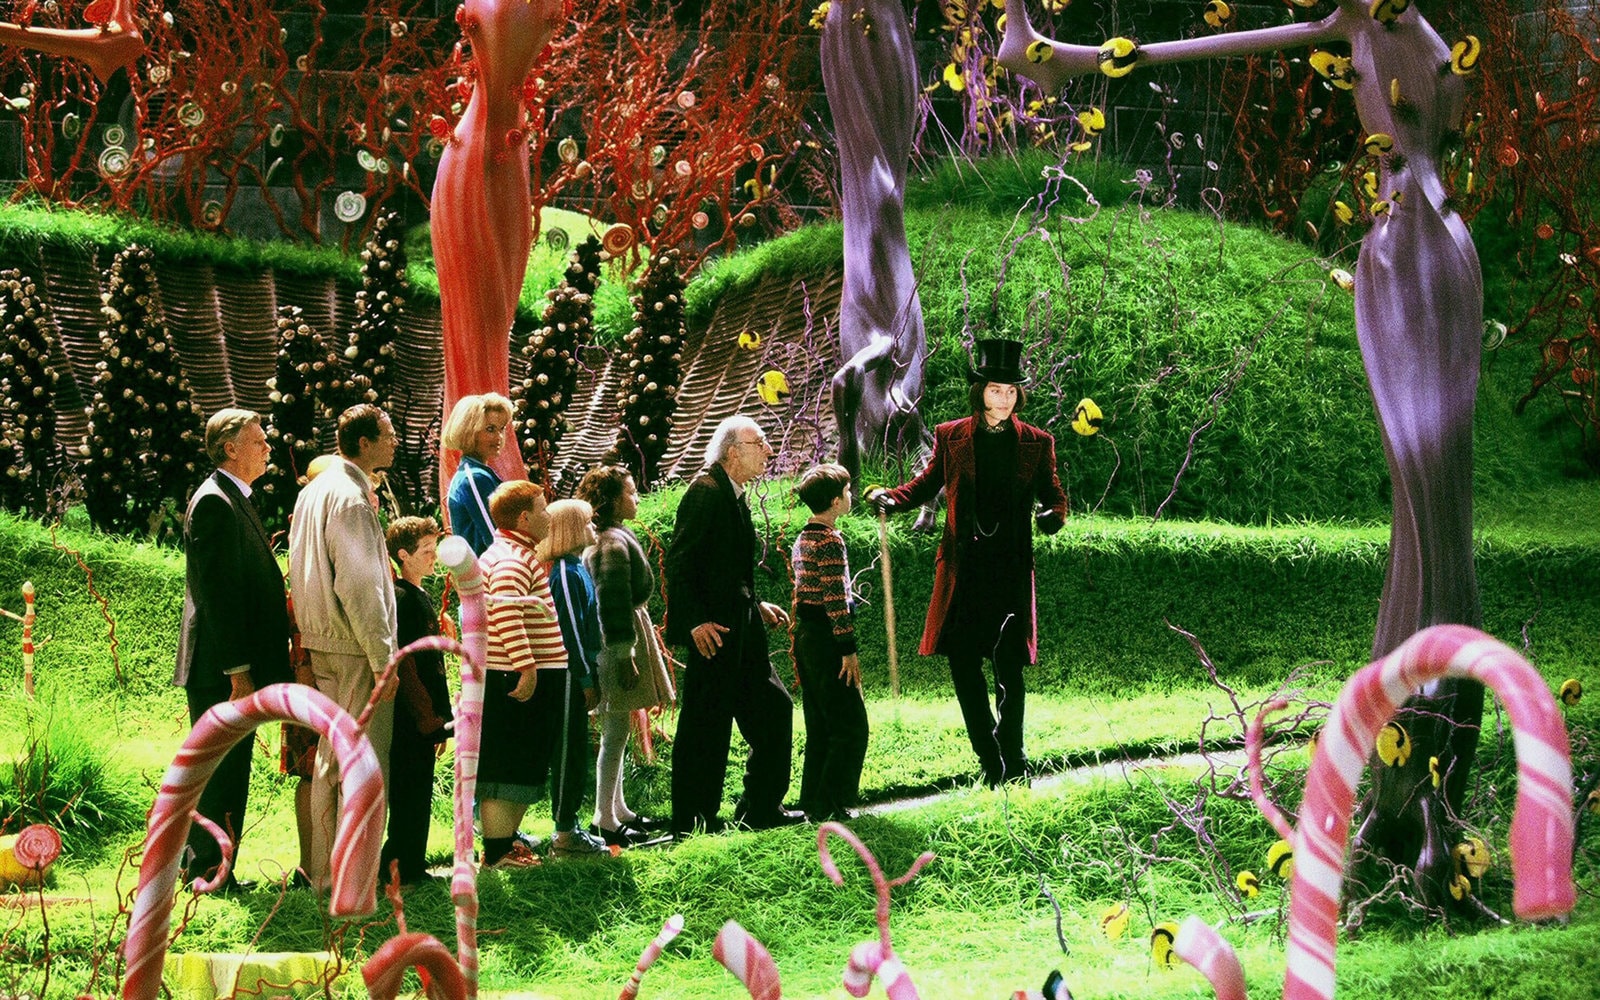 Willy Wonka Chocolate Factory Cost $224.6 Million USD